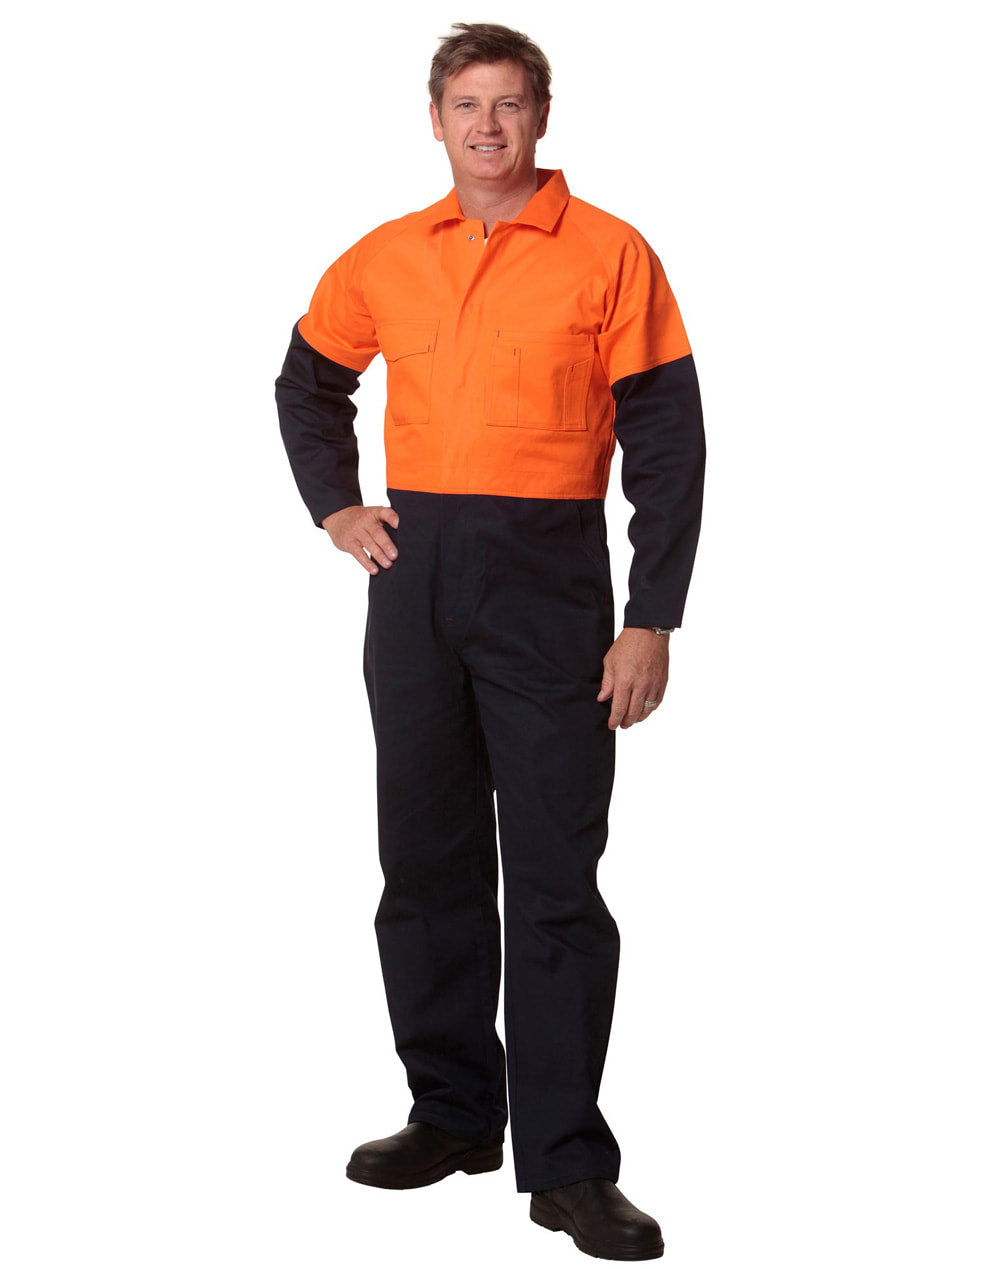 AIW SW204 MEN'S TWO TONE COVERALL Regular Size